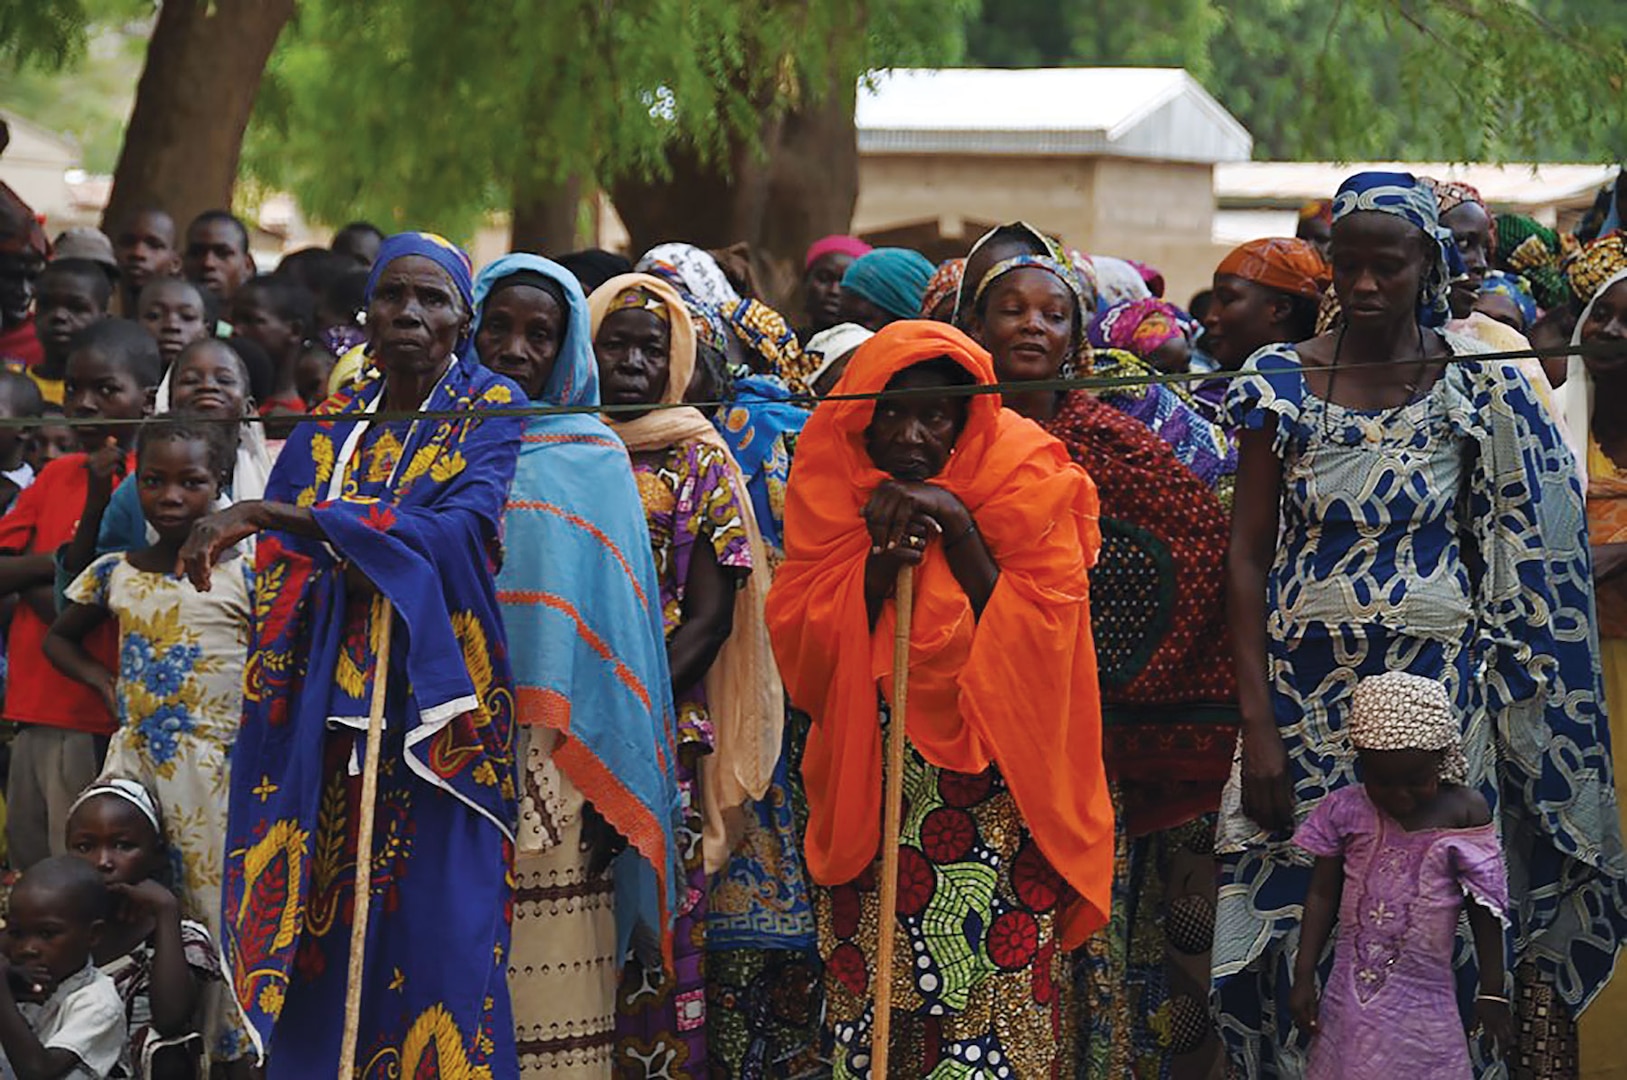 1250 people displaced by Boko Haram violence wait for medical screenings and education during a humanitarian assistance mission led by Cameroonian soldiers and funded through the USAFRICOM Humanitarian and Civic Assistance Program. (U.S. Africa Command)